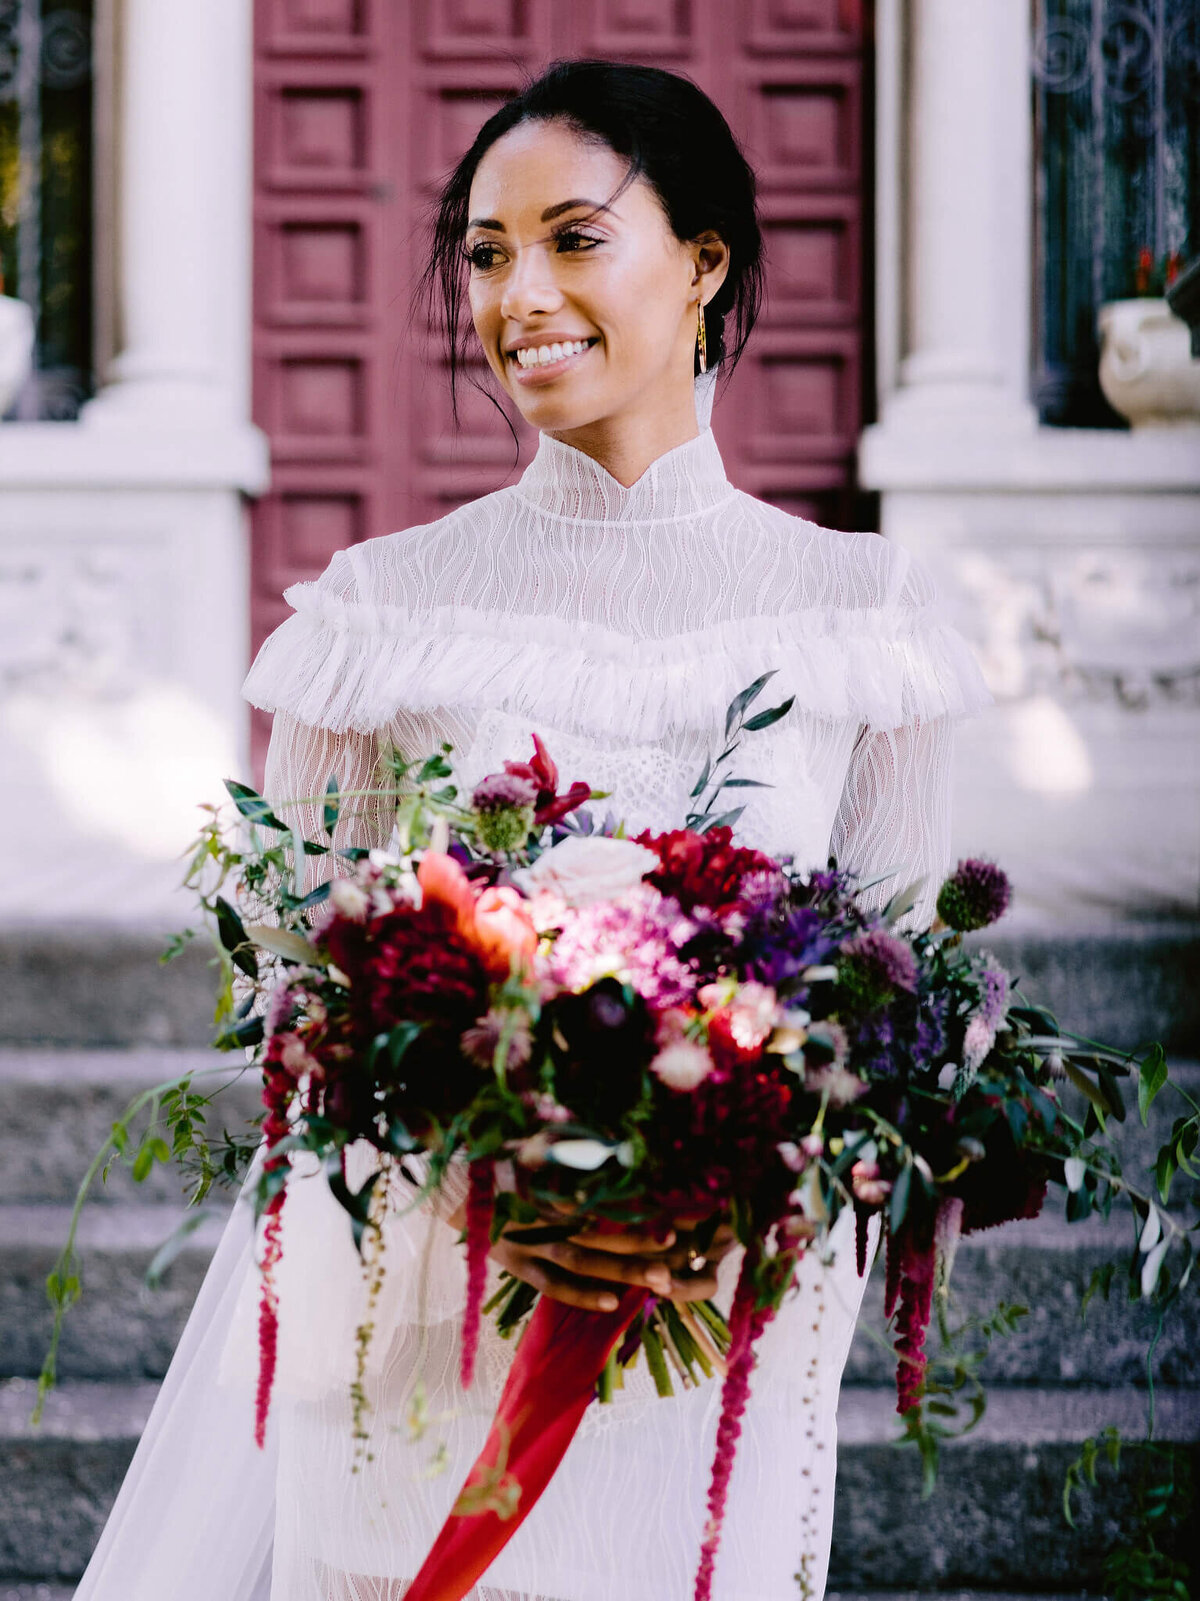 Close-up, half body shot of a bride holding a flower bouquet on a cement stair and wooden door background